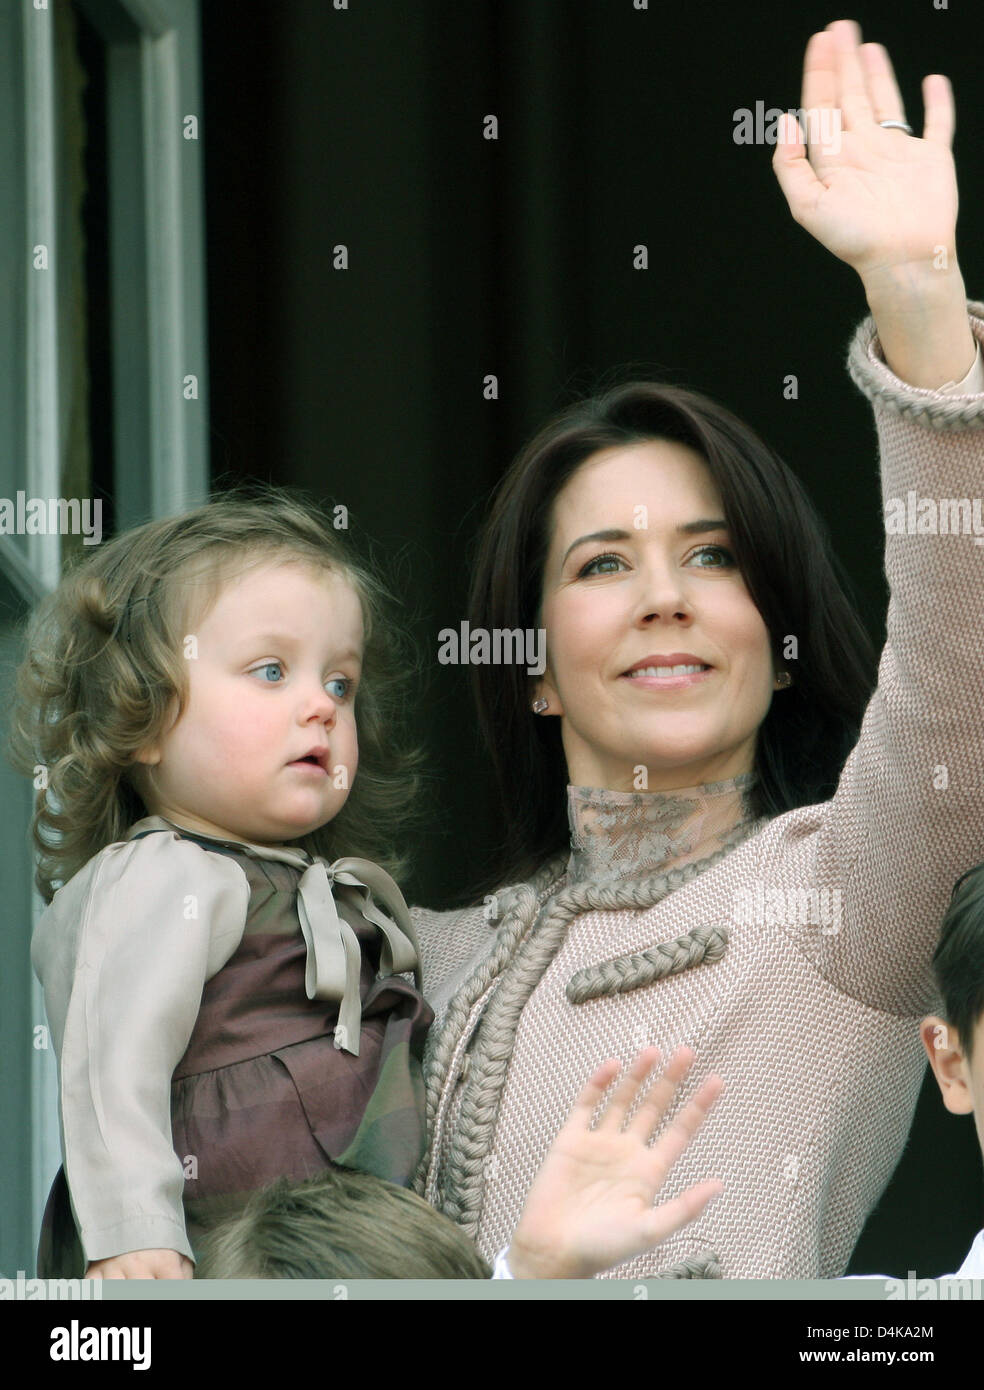 Princess Mary of Denmark (R) and her daughter Princess Isabella of Denmark attend the celebration of the 69th birthday of Queen Margrethe II of Denmark on the balcony of Amalienborg Palace in Copenhagen, Denmark, 16 April 2009. Photo: Patrick van Katwijk Stock Photo